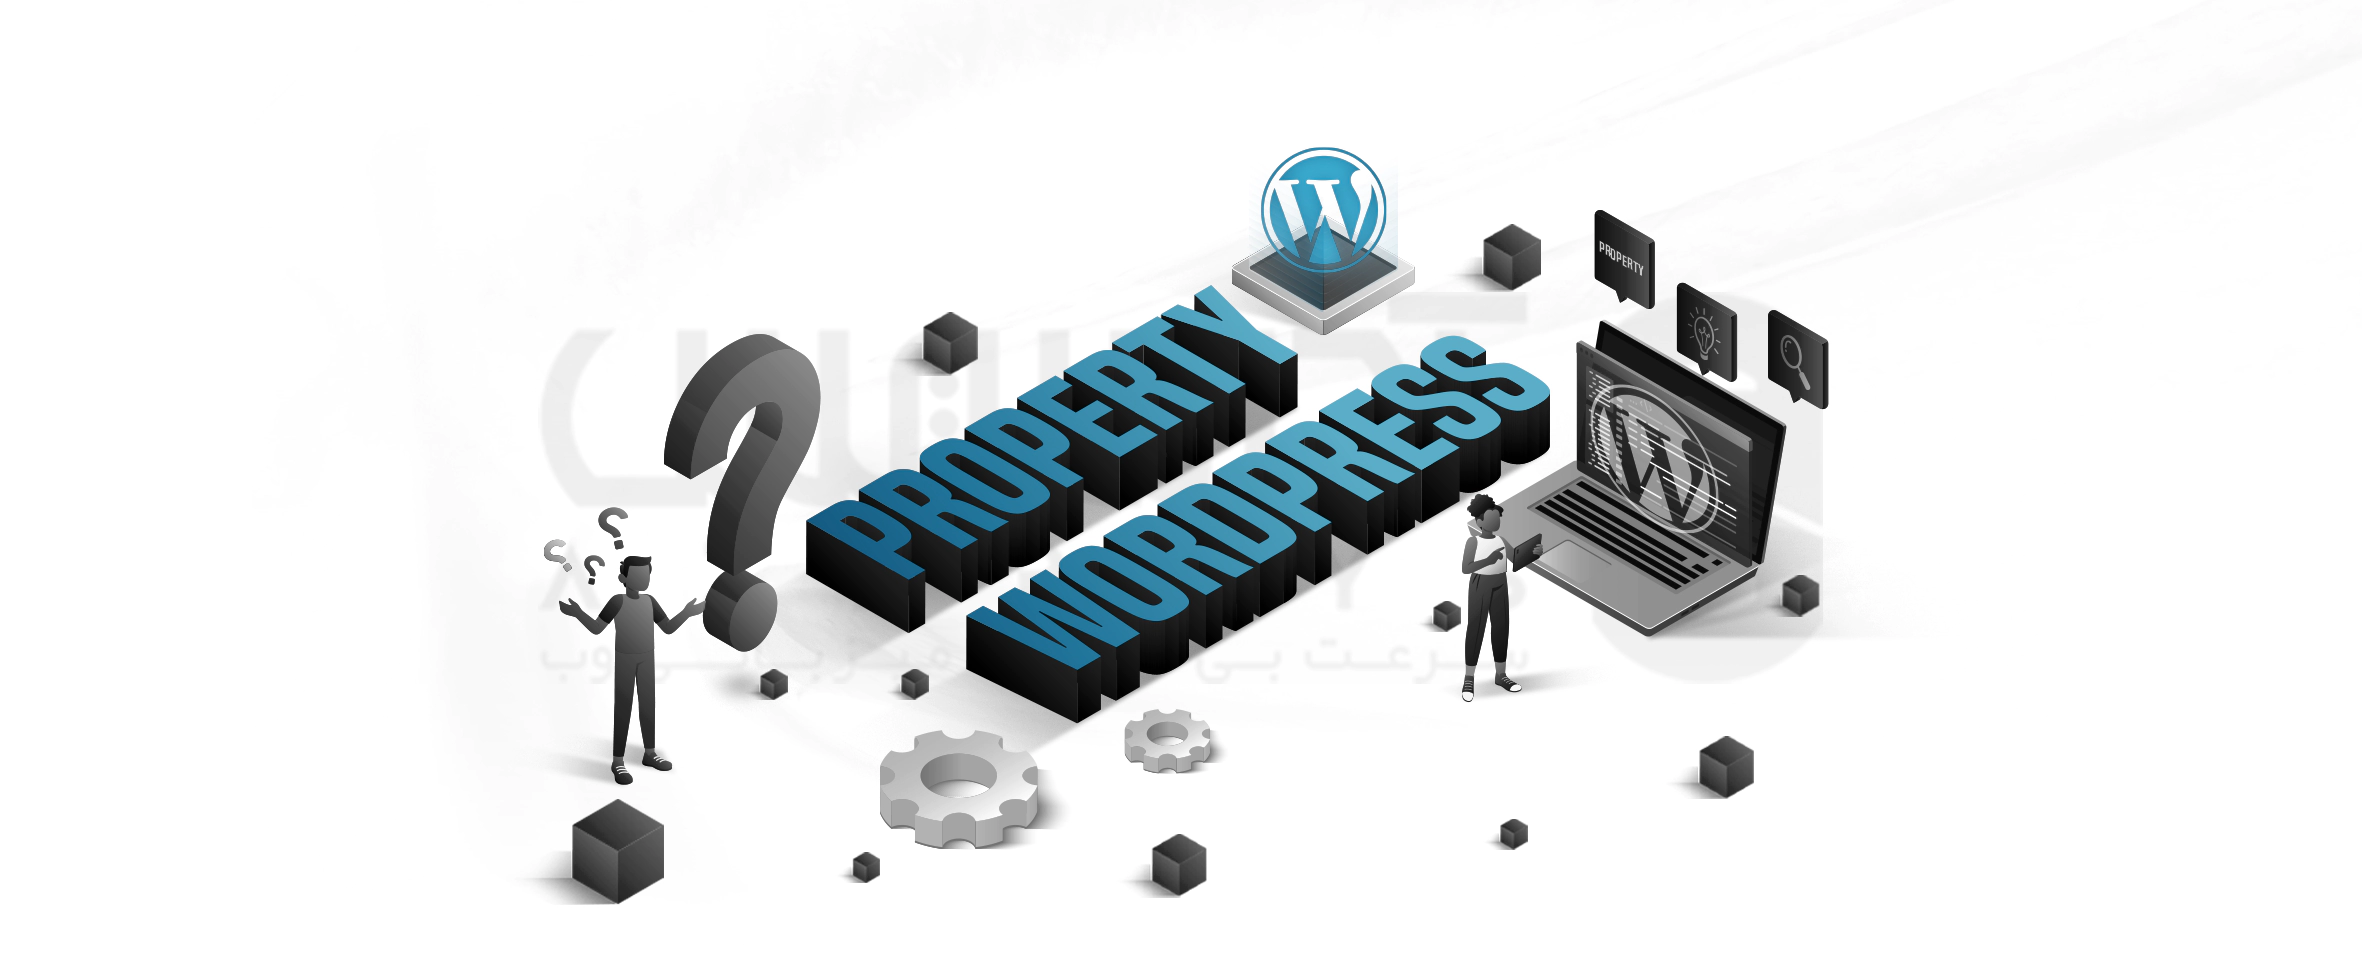 What are the features of the best WordPress hosting